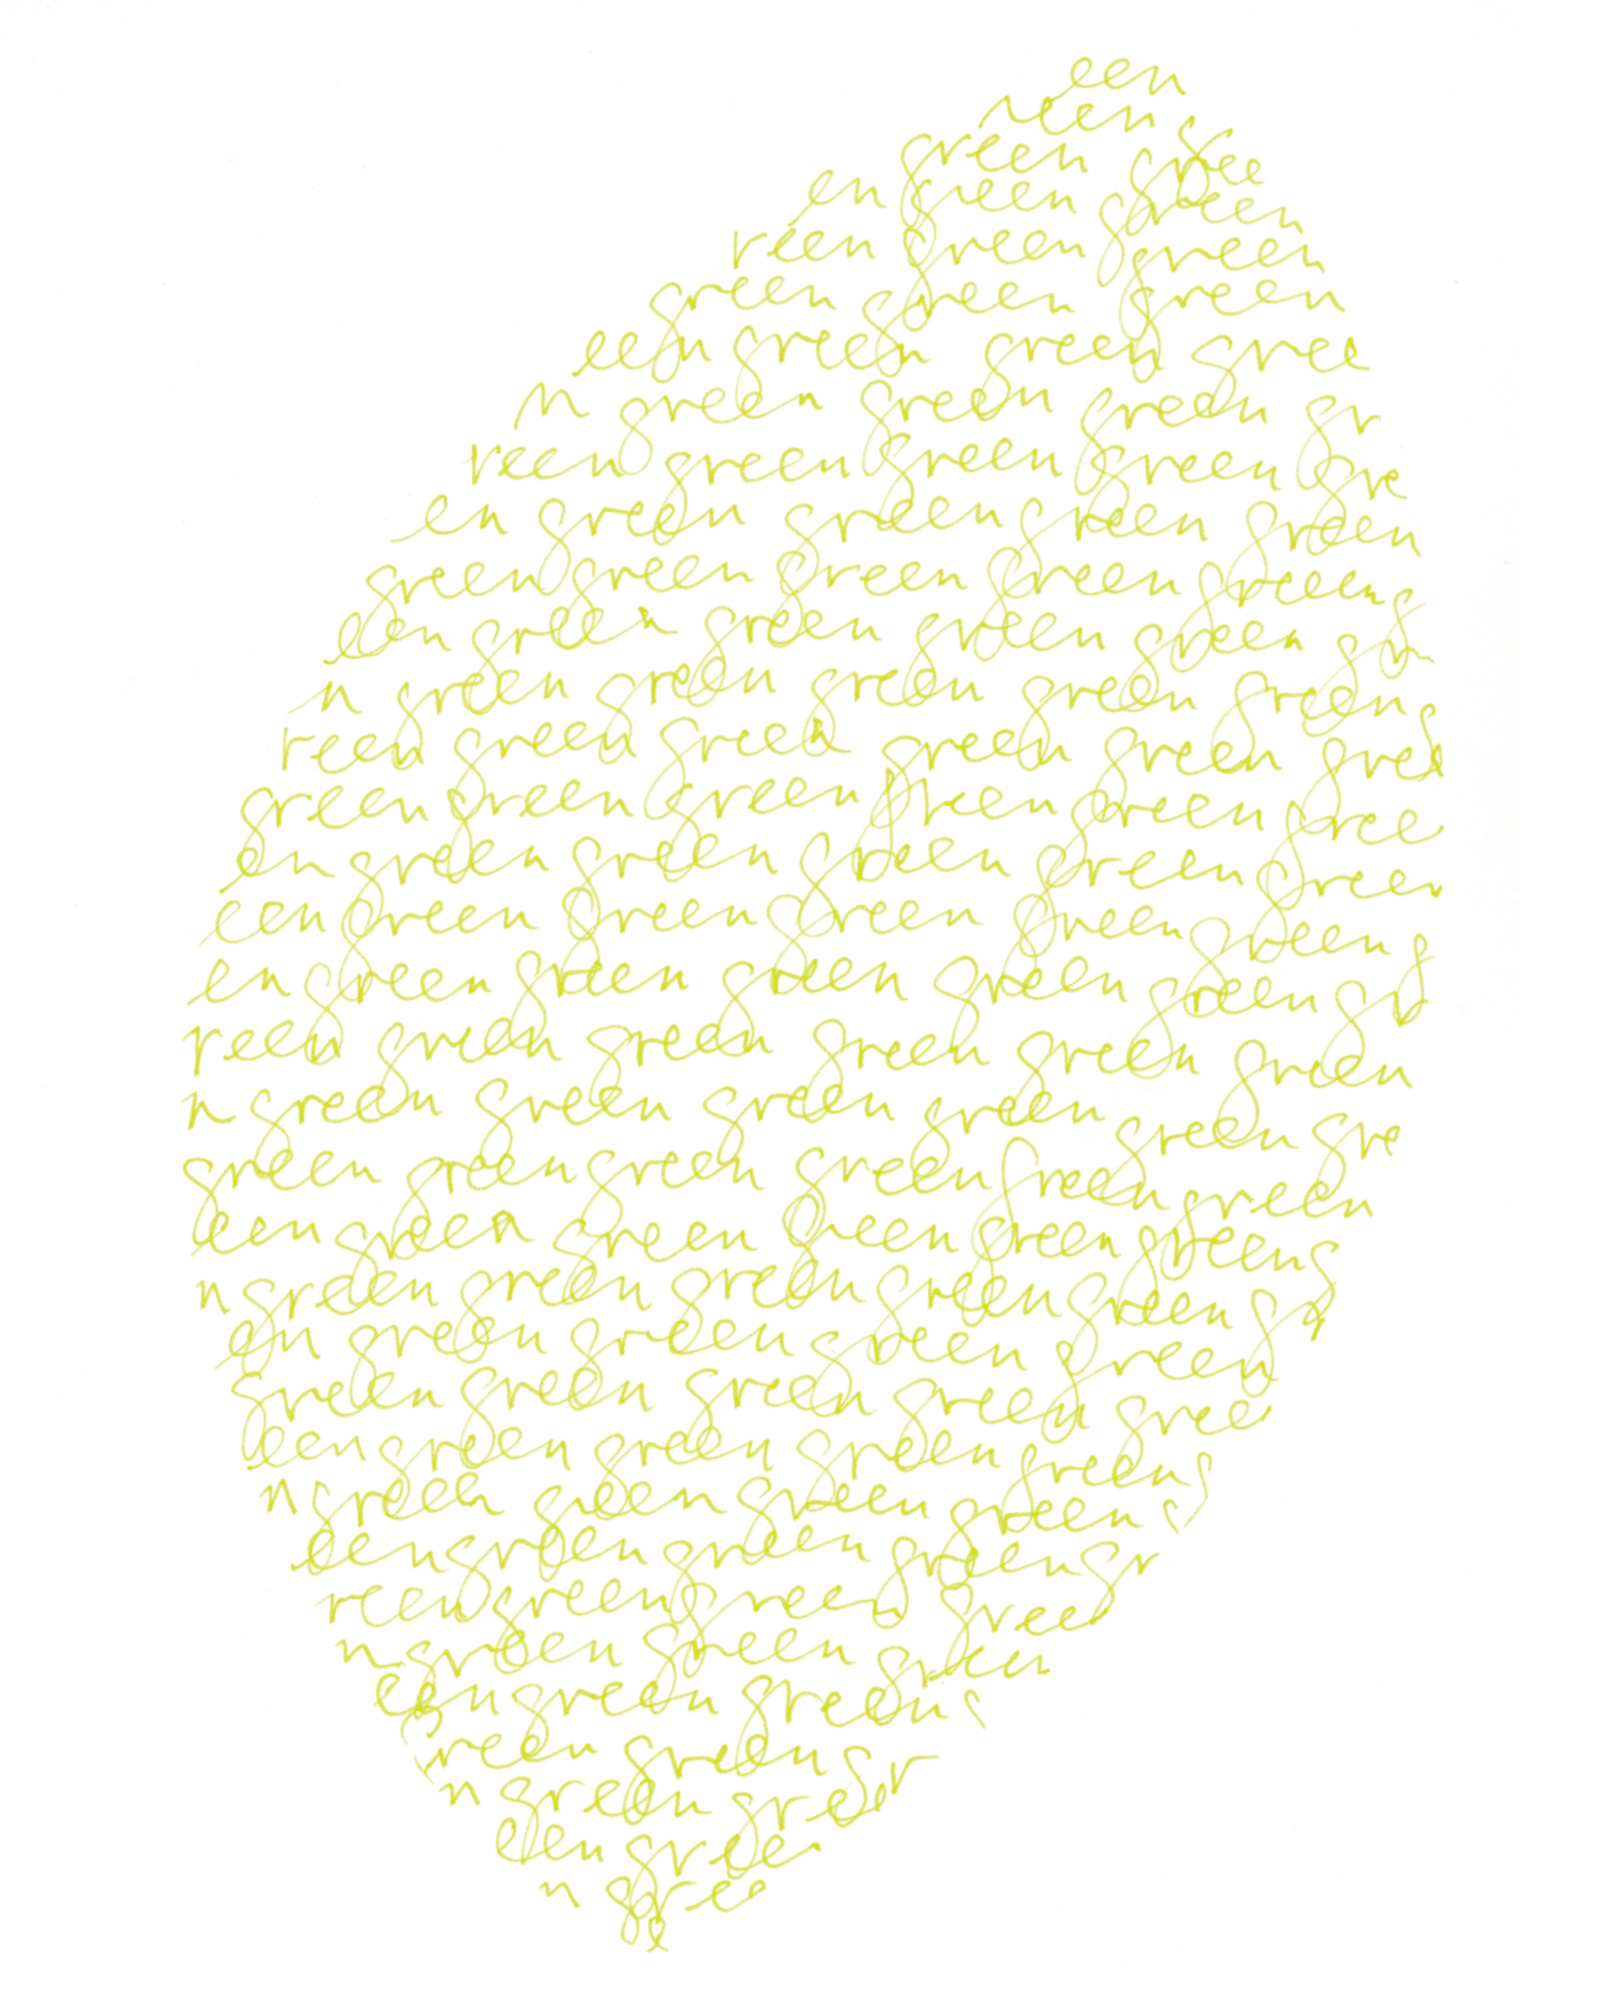 A drawing of a leaflike form made from writing spelling out the word “green.”